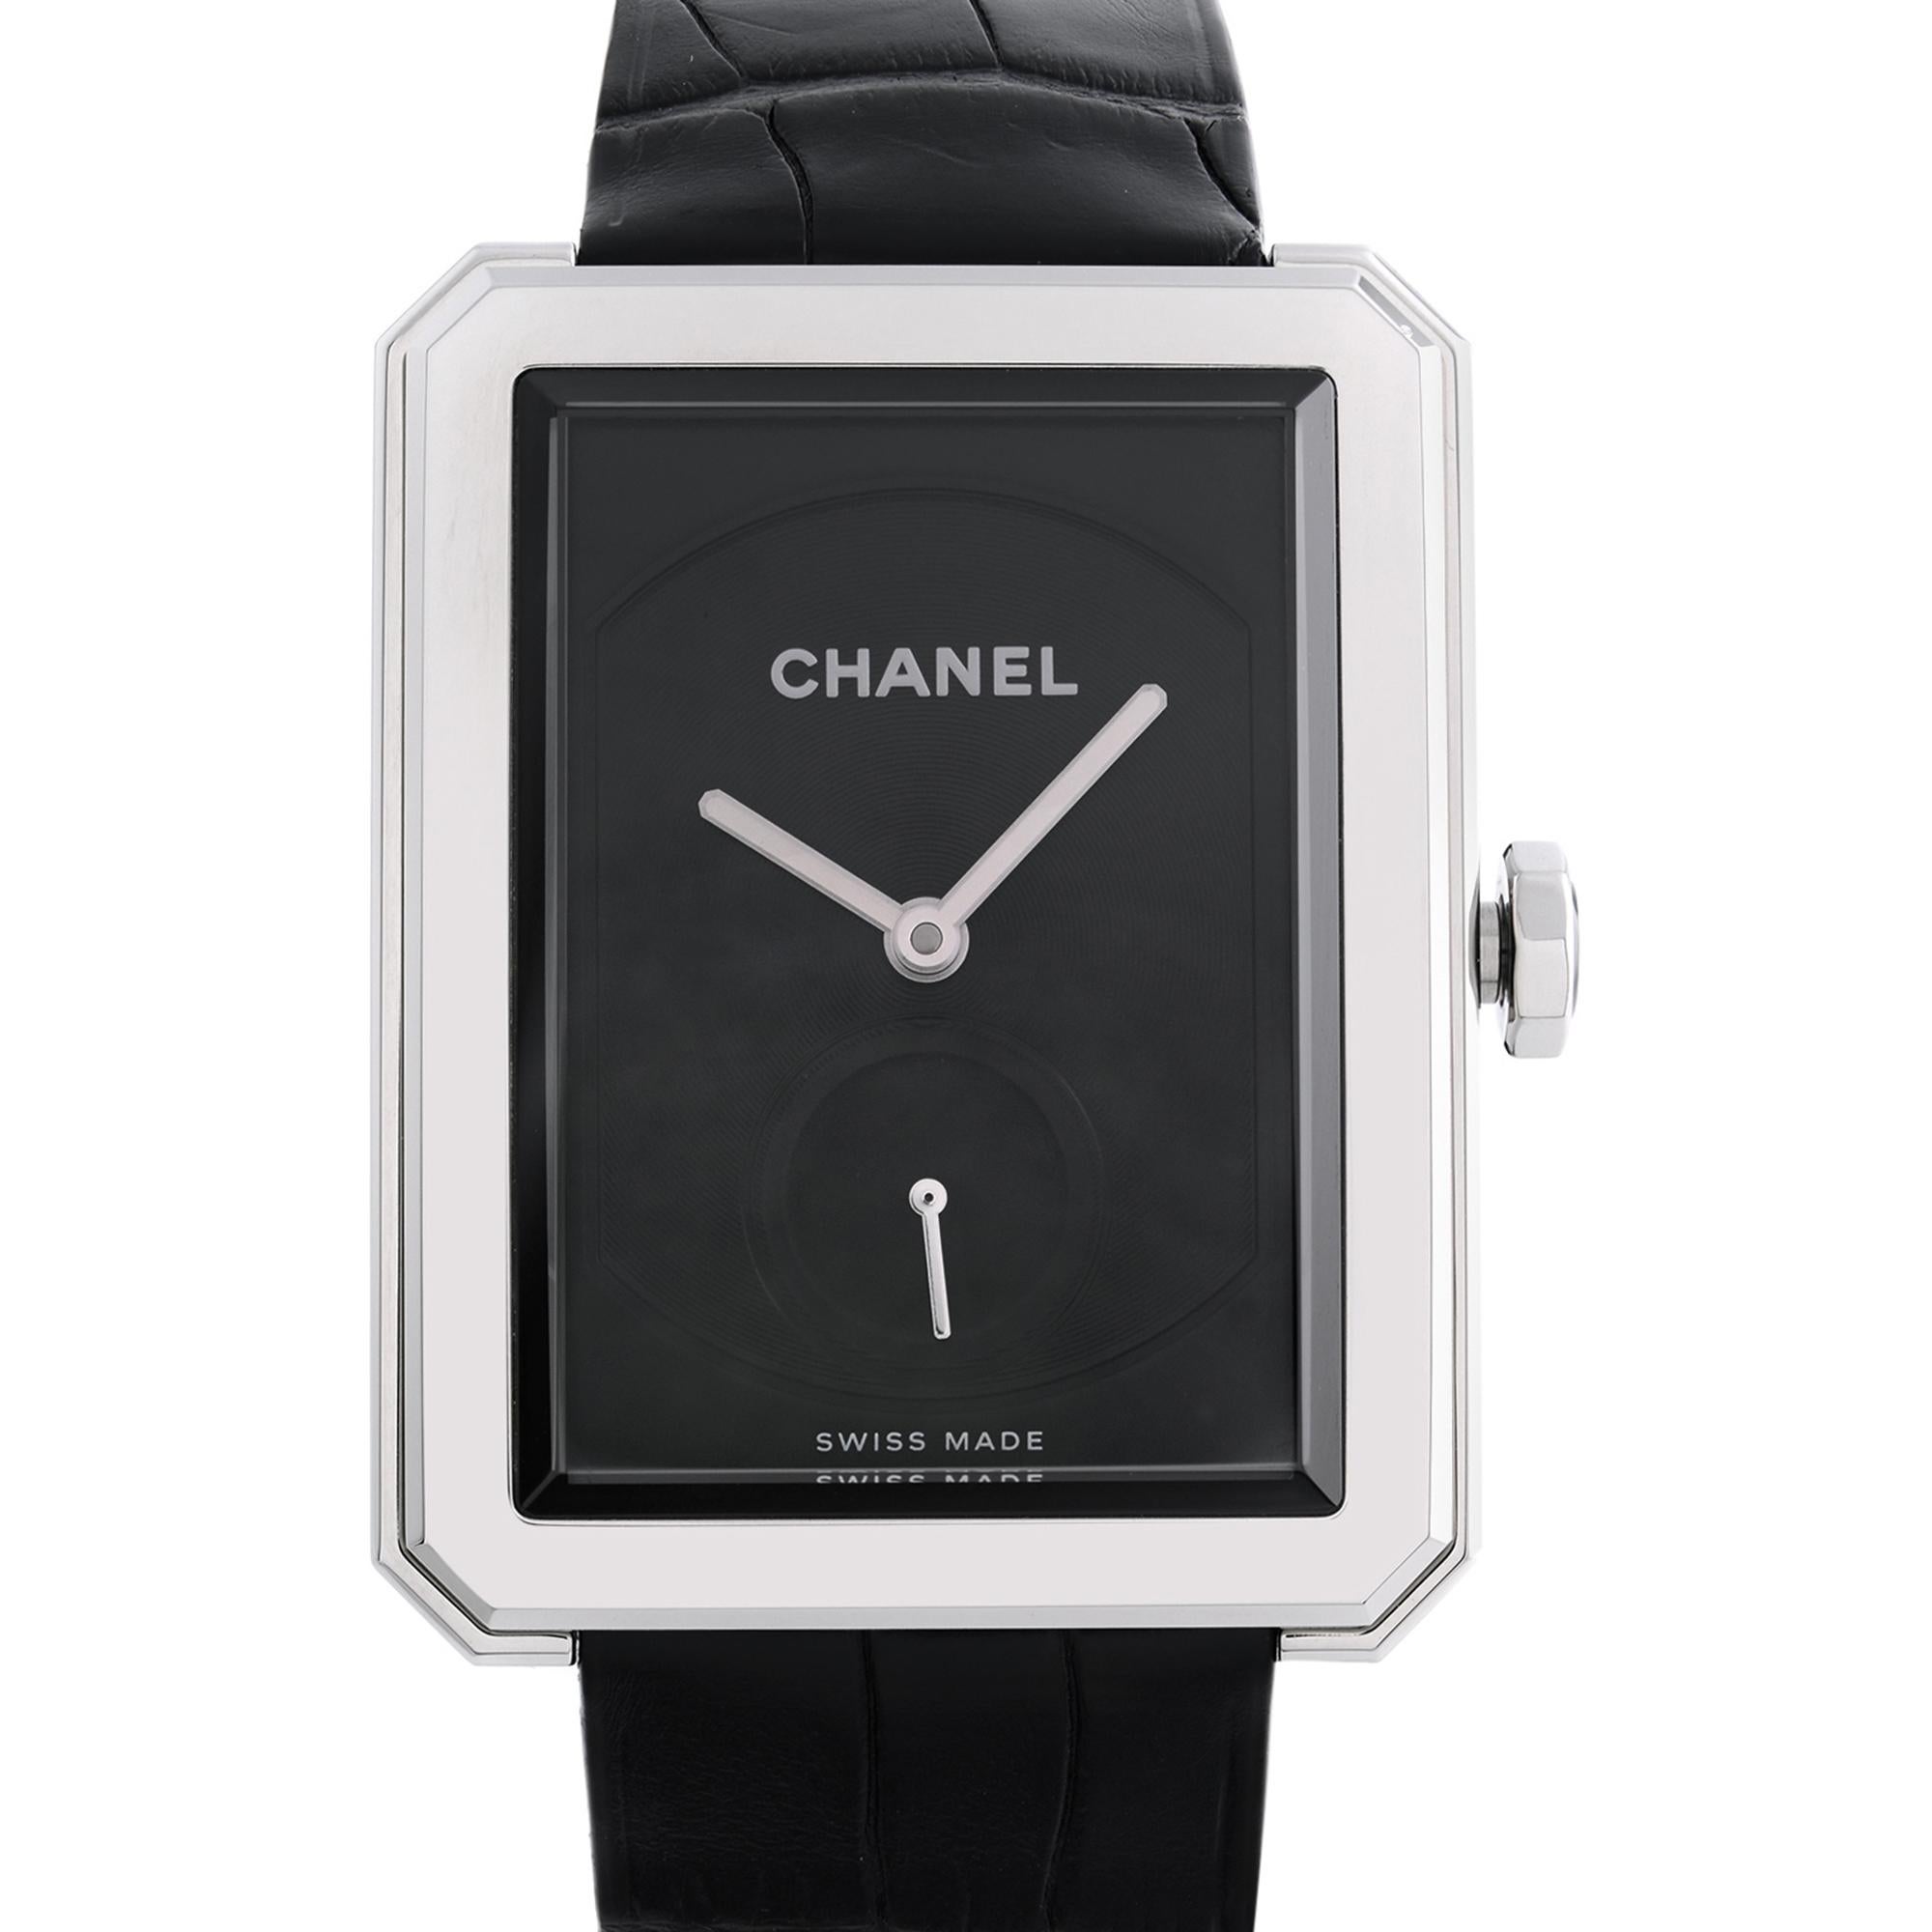 Unworn Chanel Boy-Friend Stainless Steel Black Dial Hand Wind Ladies Watch. This Beautiful Timepiece Features: Stainless Steel Case with a Black (Alligator) Leather Strap, Fixed Stainless Steel Bezel, Black Guilloche Dial with Silver-Tone Hands. No